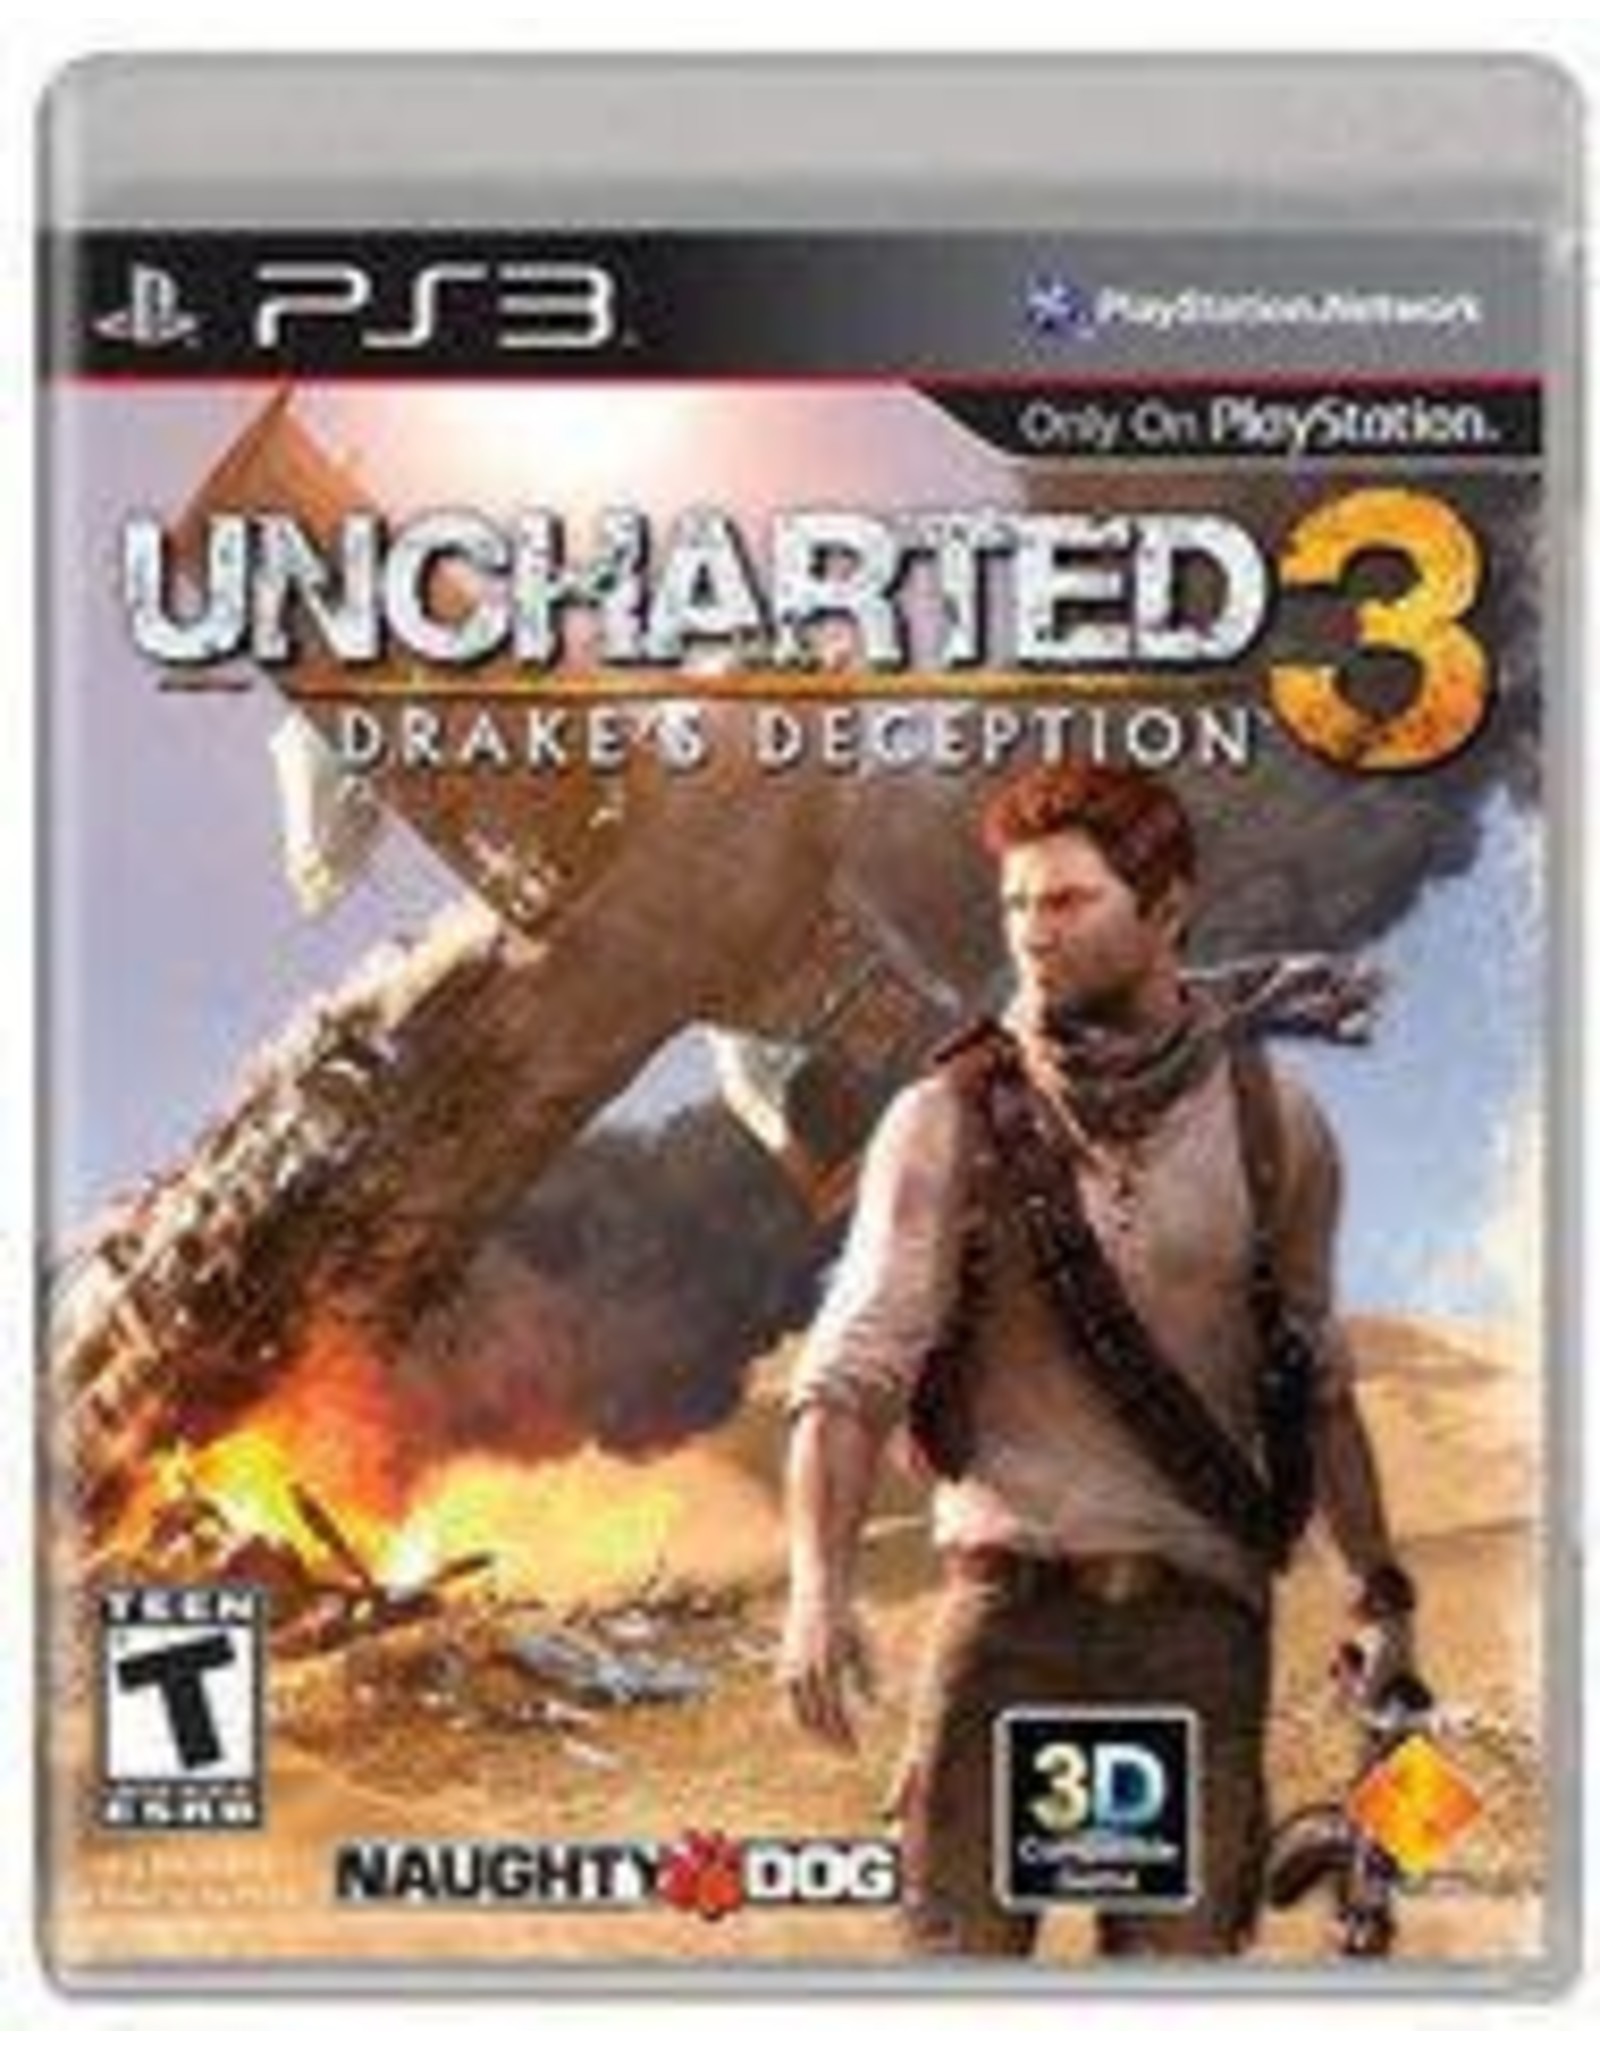 Playstation 3 Uncharted 3: Drake's Deception (Used)